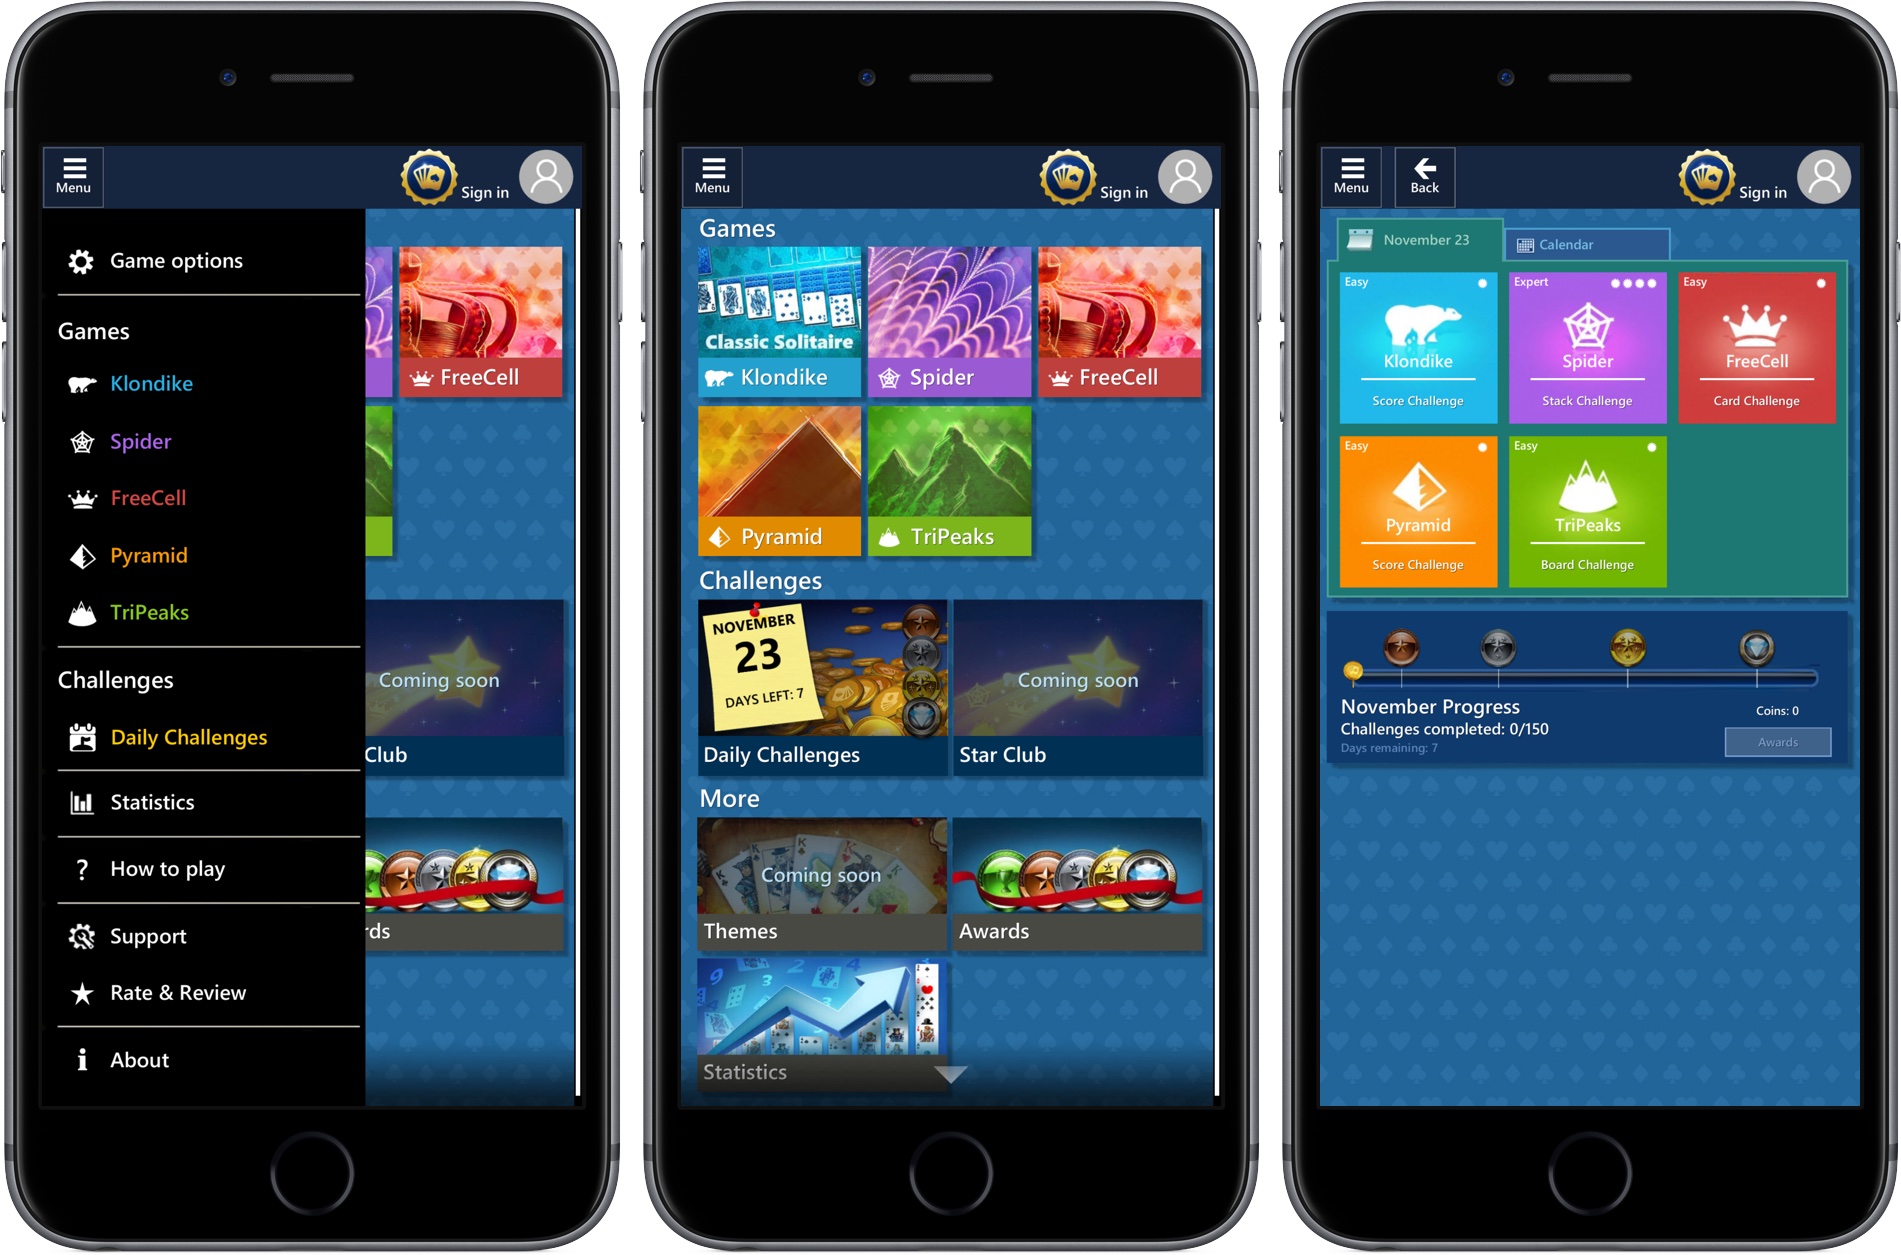 Microsoft Solitaire Collection app ads on Vimeo